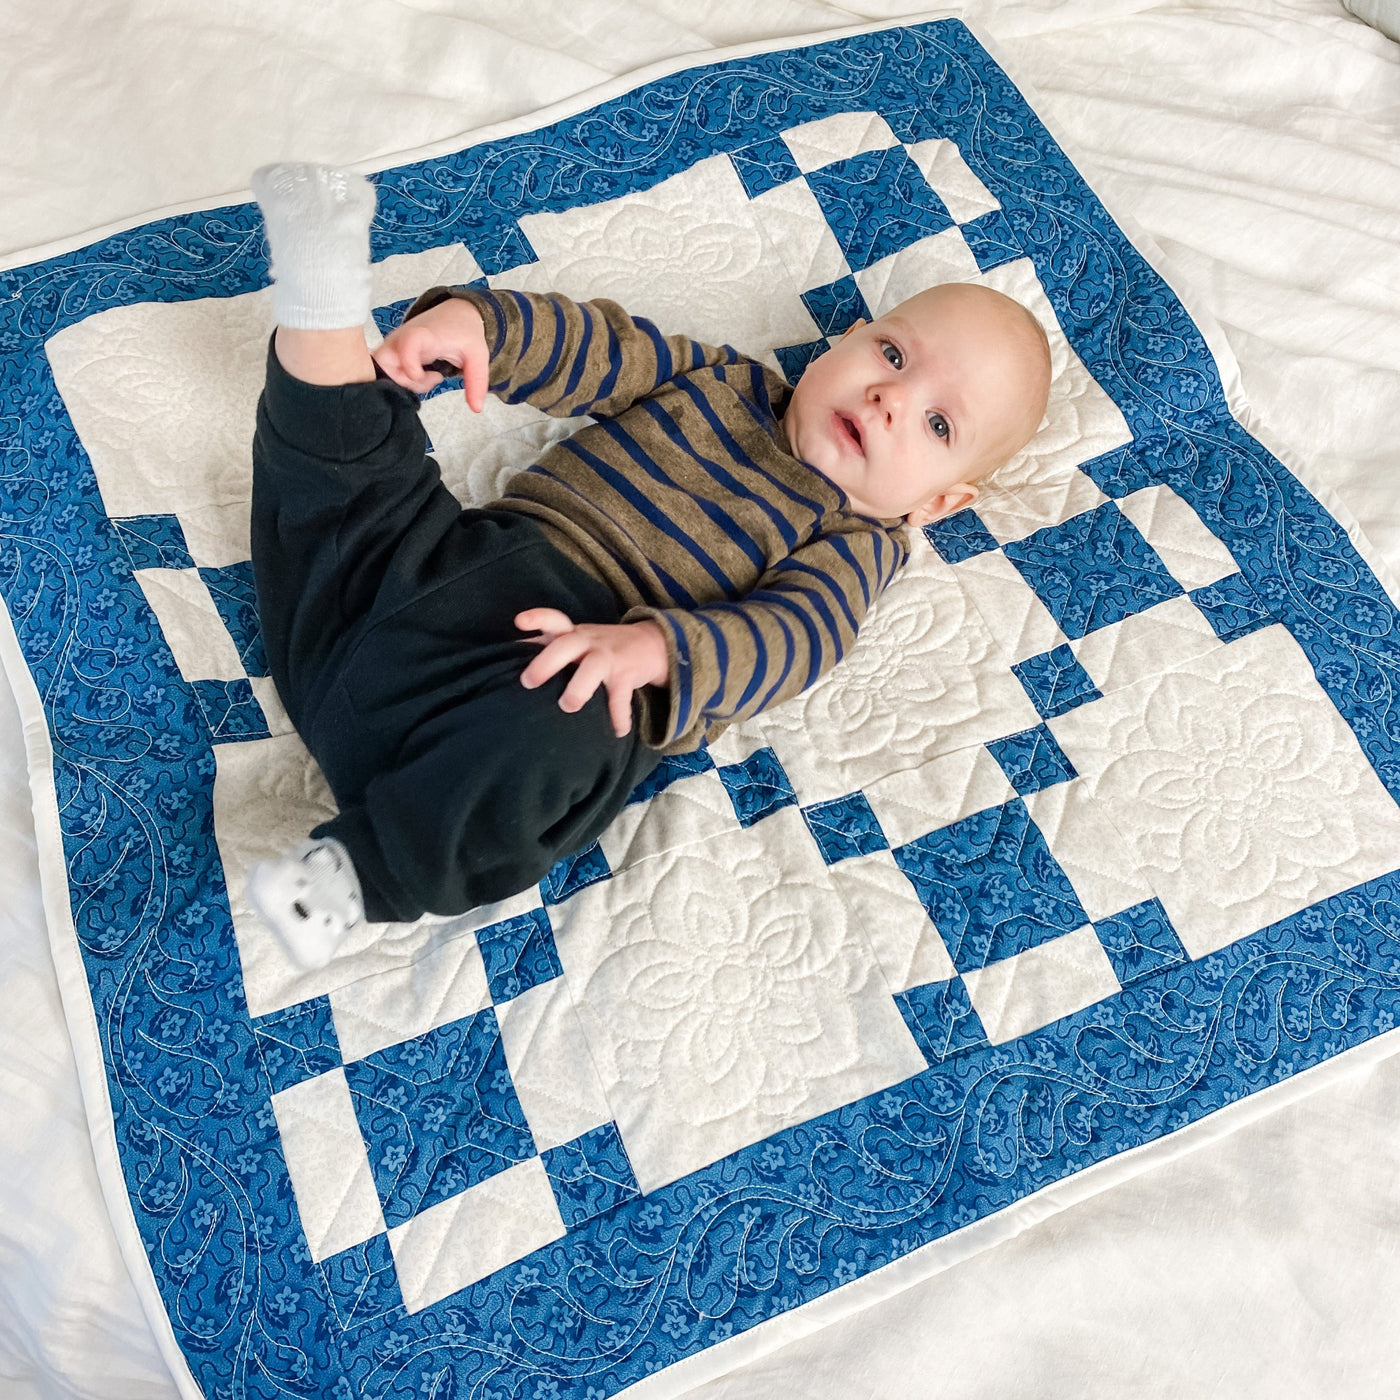 A handmade, heirloom, patchwork of indigo/blue nine patch with white background fabric, natural color backing, 100% cotton batting, Floral top quilting in the white centers, X's in the 9 patch squares, and feathers along the borders, machine top stitched binding, on this baby size quilt